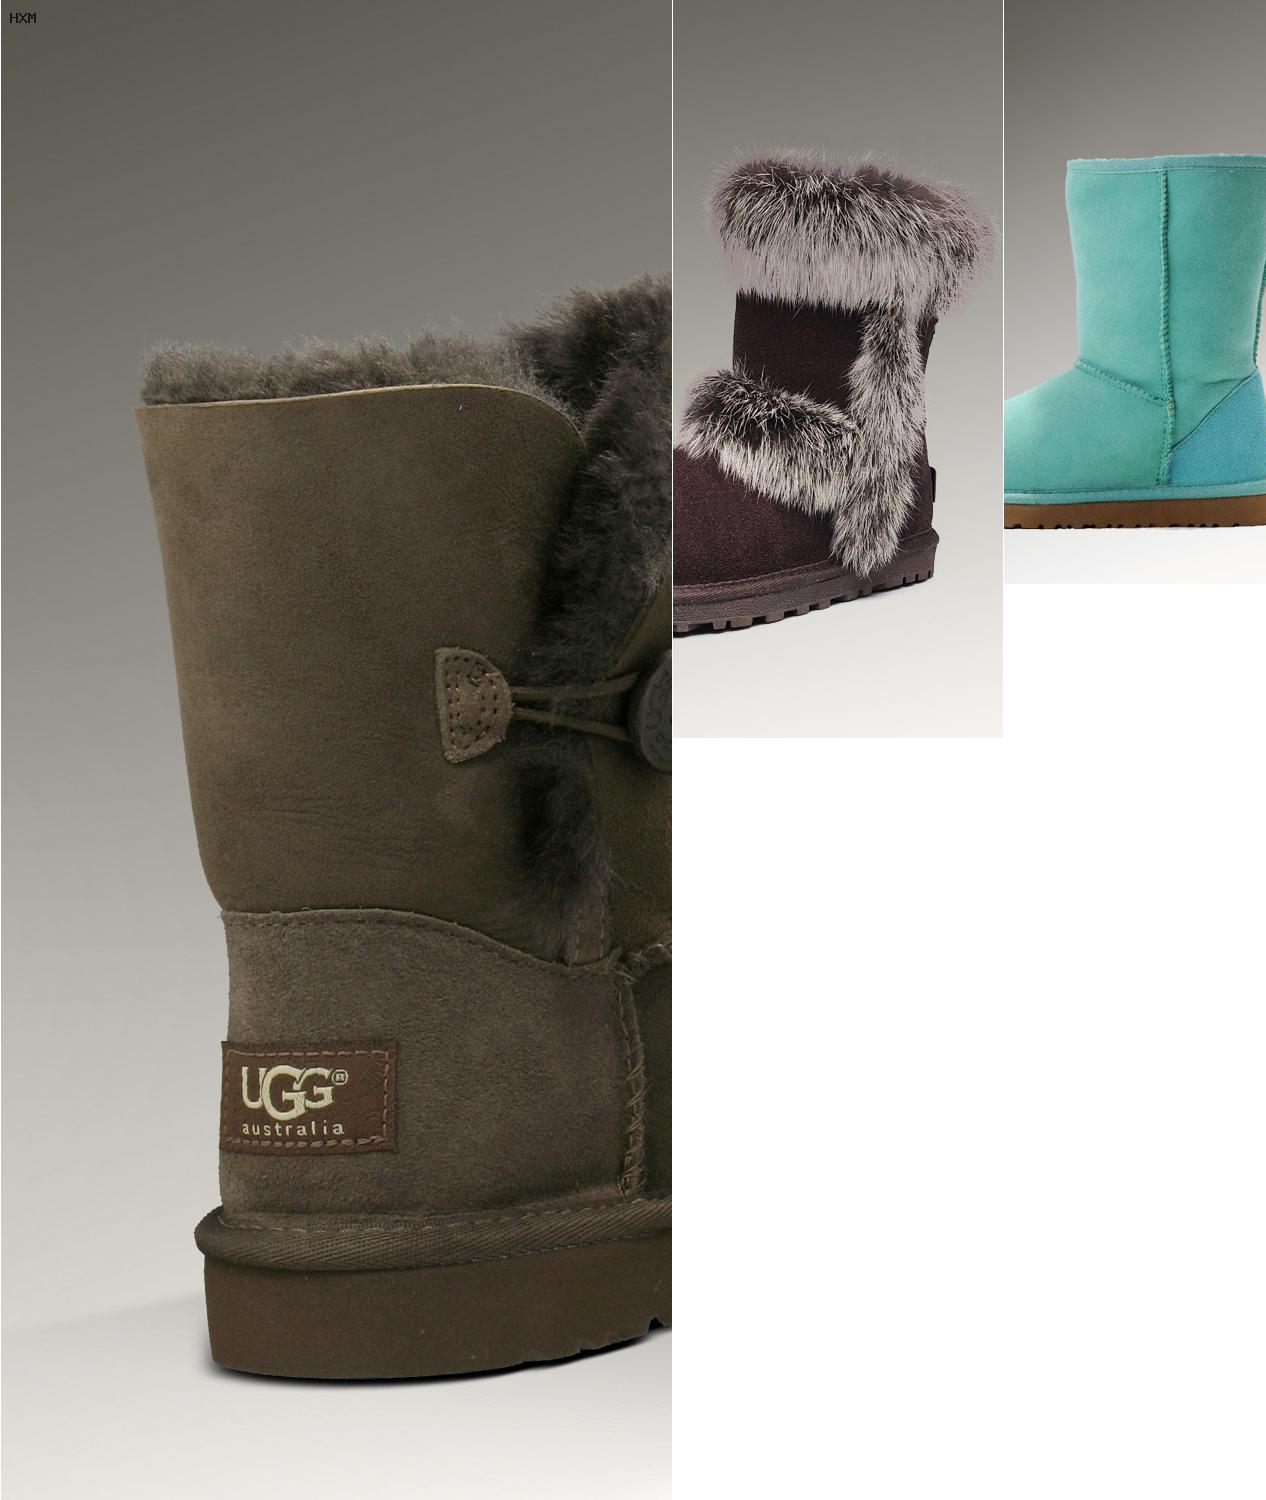 roermond outlet ugg boots preise